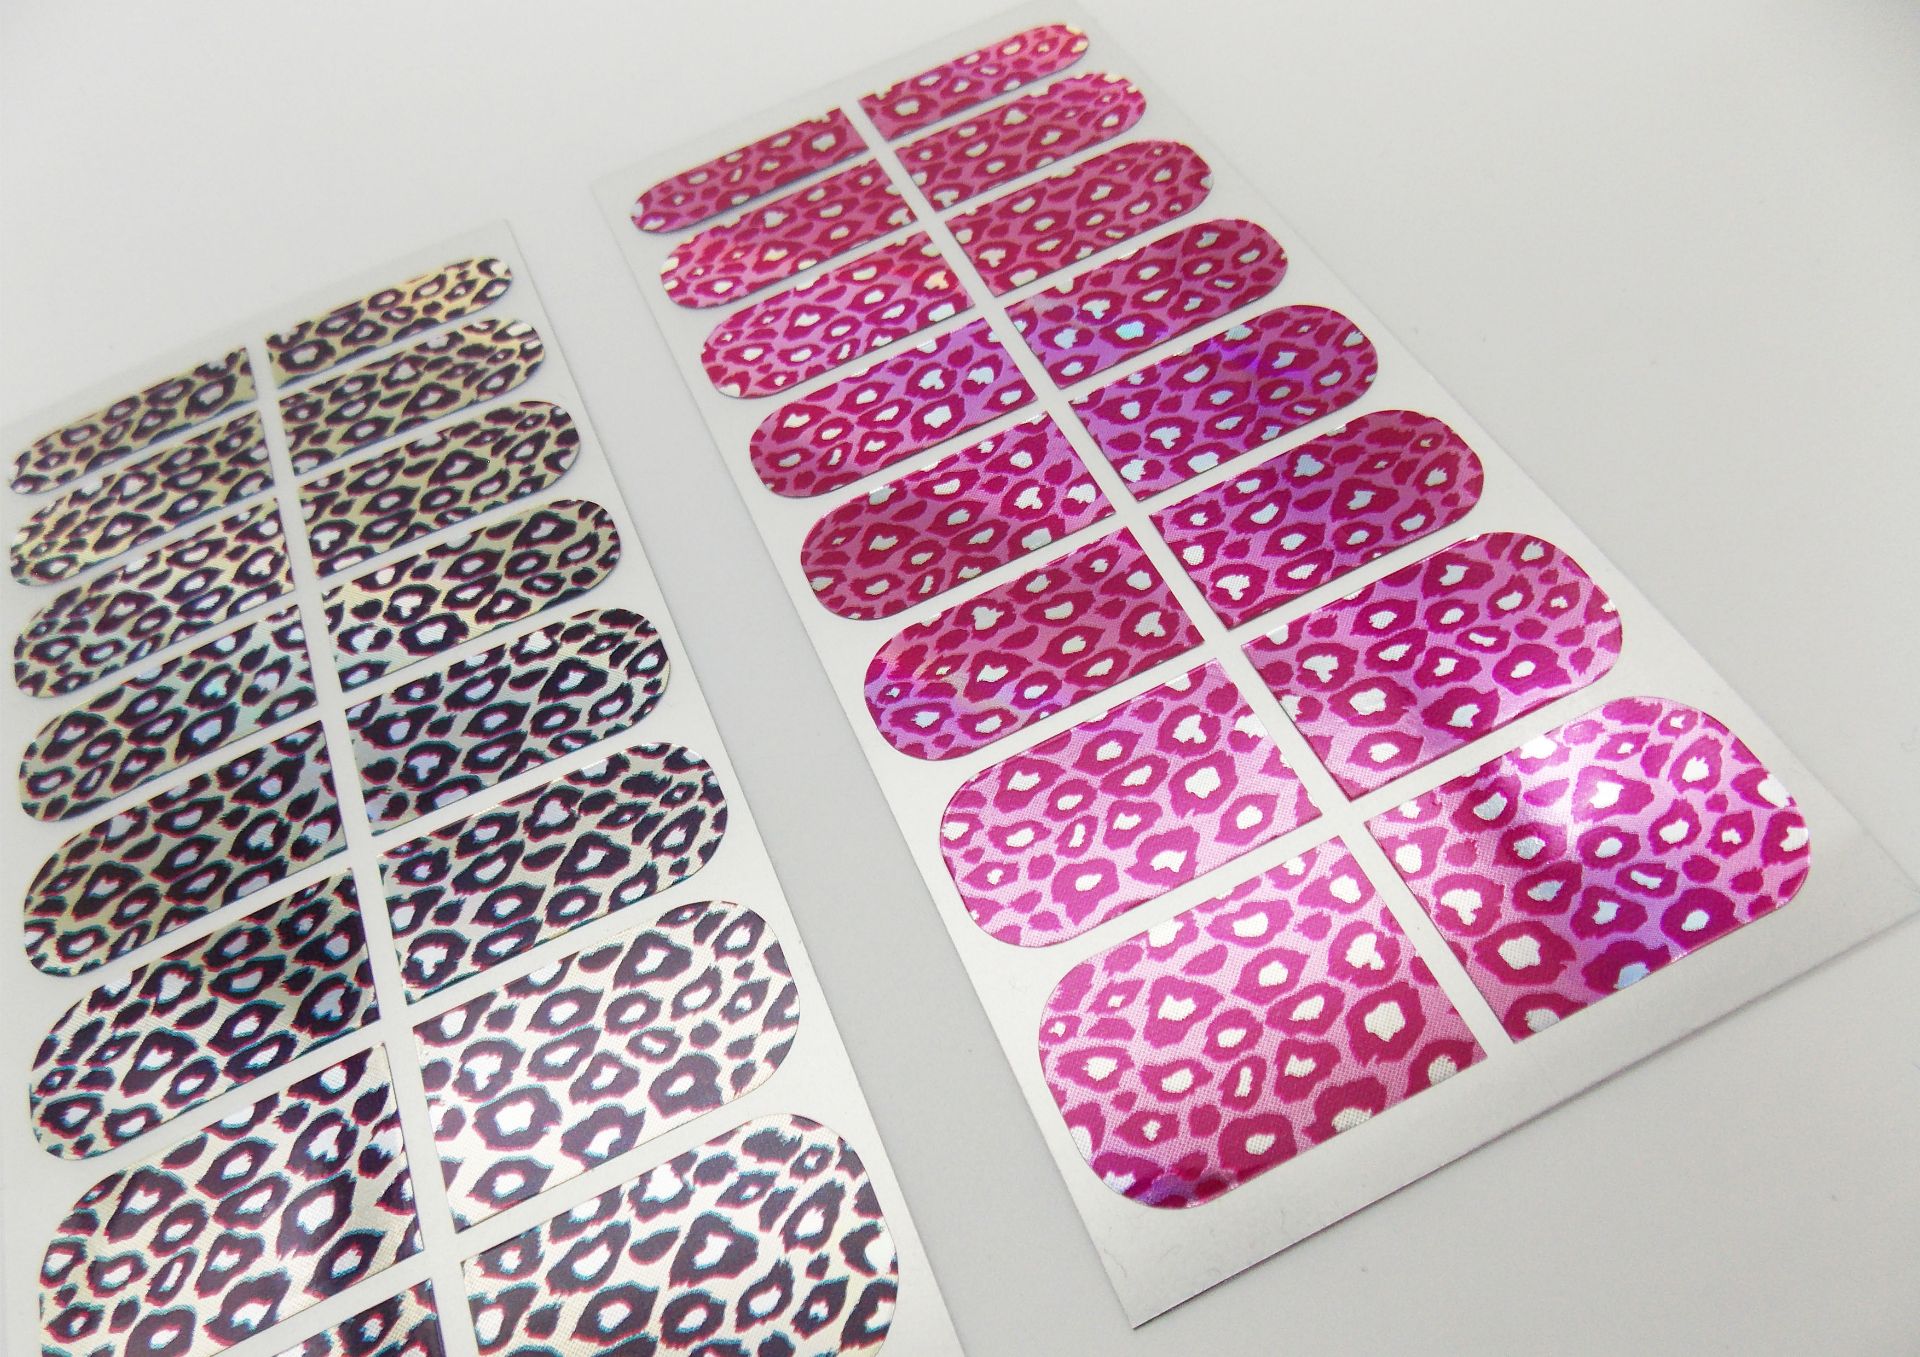 144 Packs Of Professional Nail Art Wrap Transfers - 3 Different Animal Print Styles - Image 10 of 10